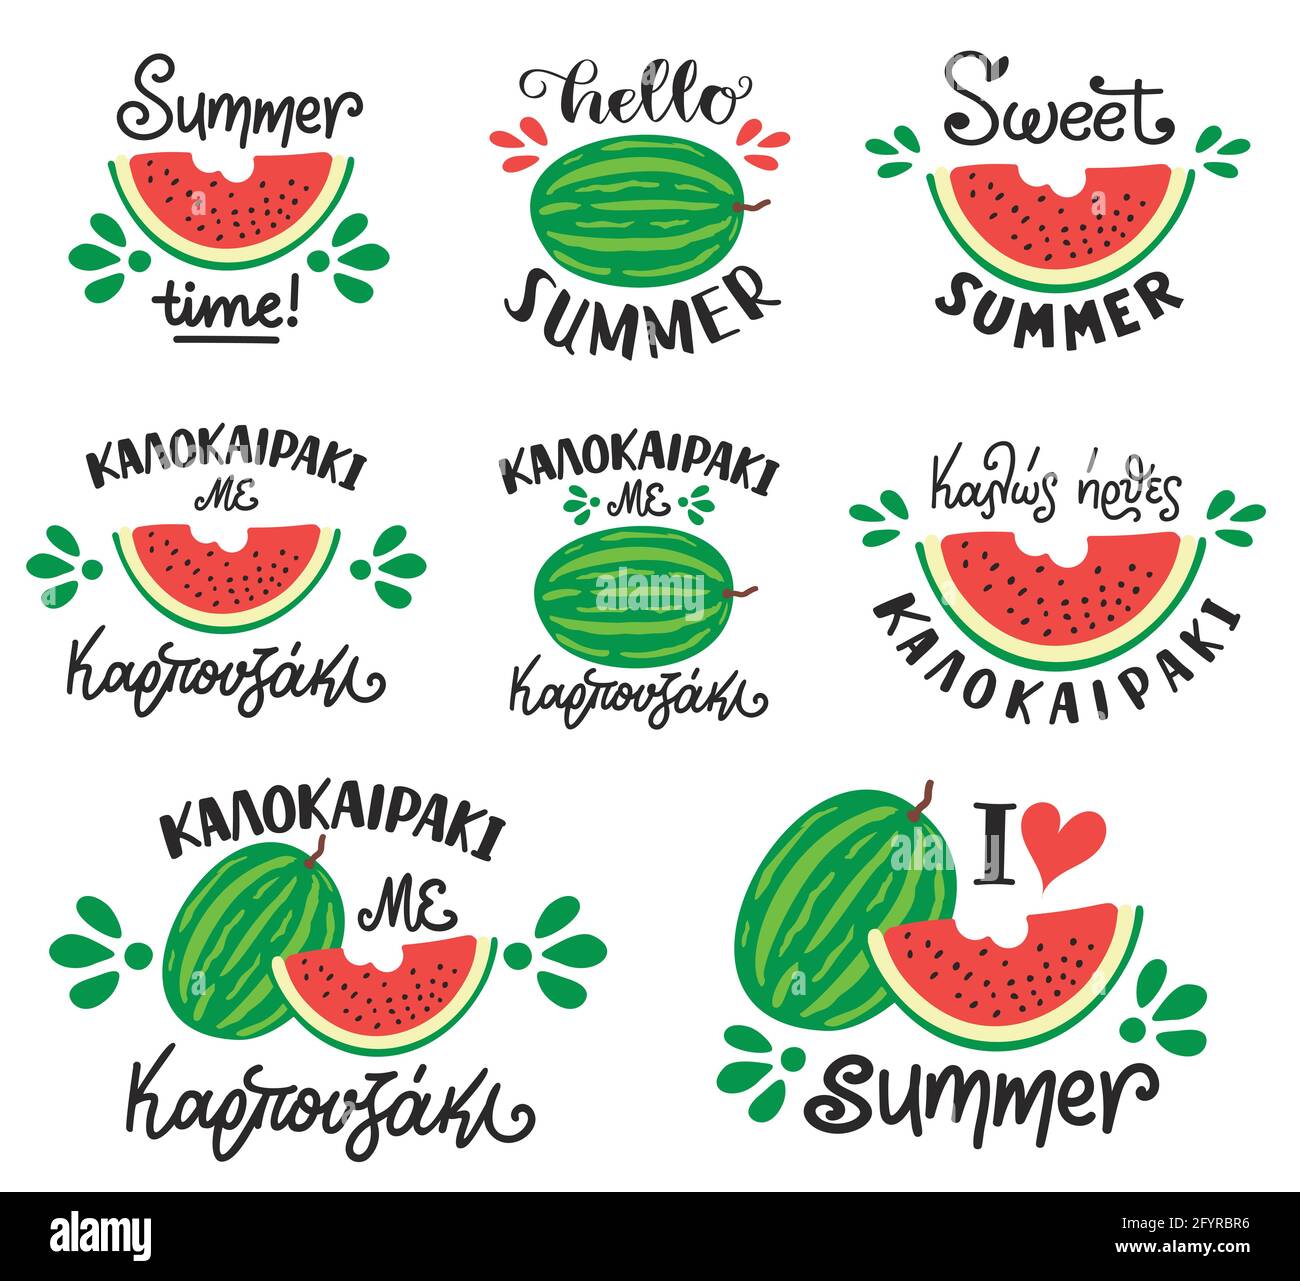 Watermelon set isolated on white background. Summer fruit whole, sliced with seeds and bited. Cartoon style. Summer phrases.Vector print illustration. Stock Vector